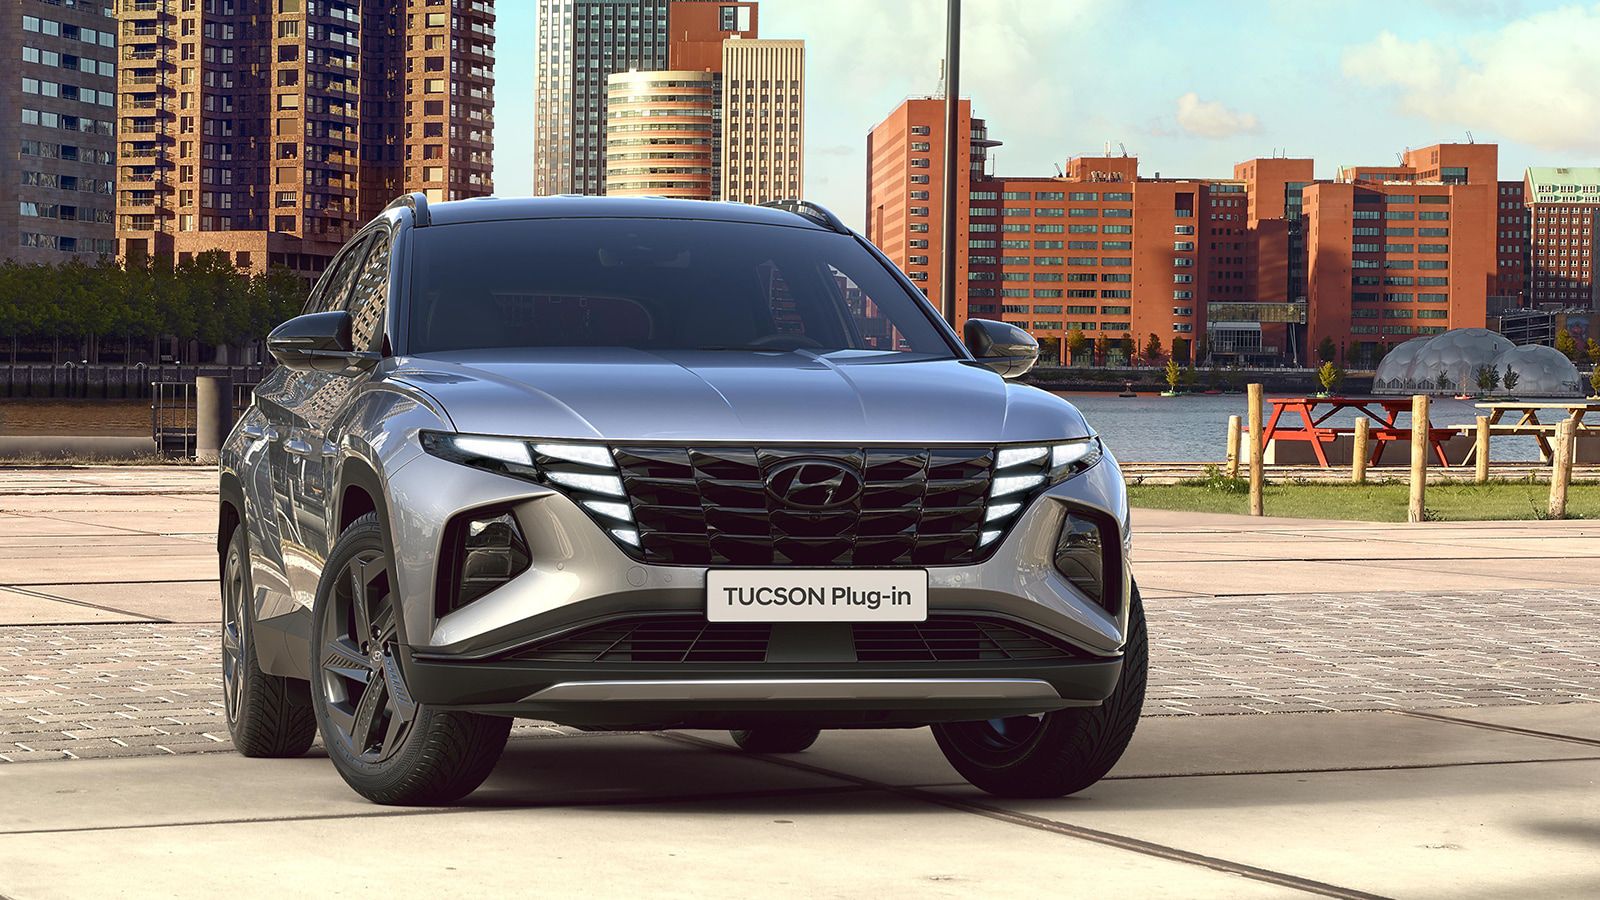 Hyundai TUCSON Plug-in Hybrid in Shimmering Silver Metallic pictured from the front